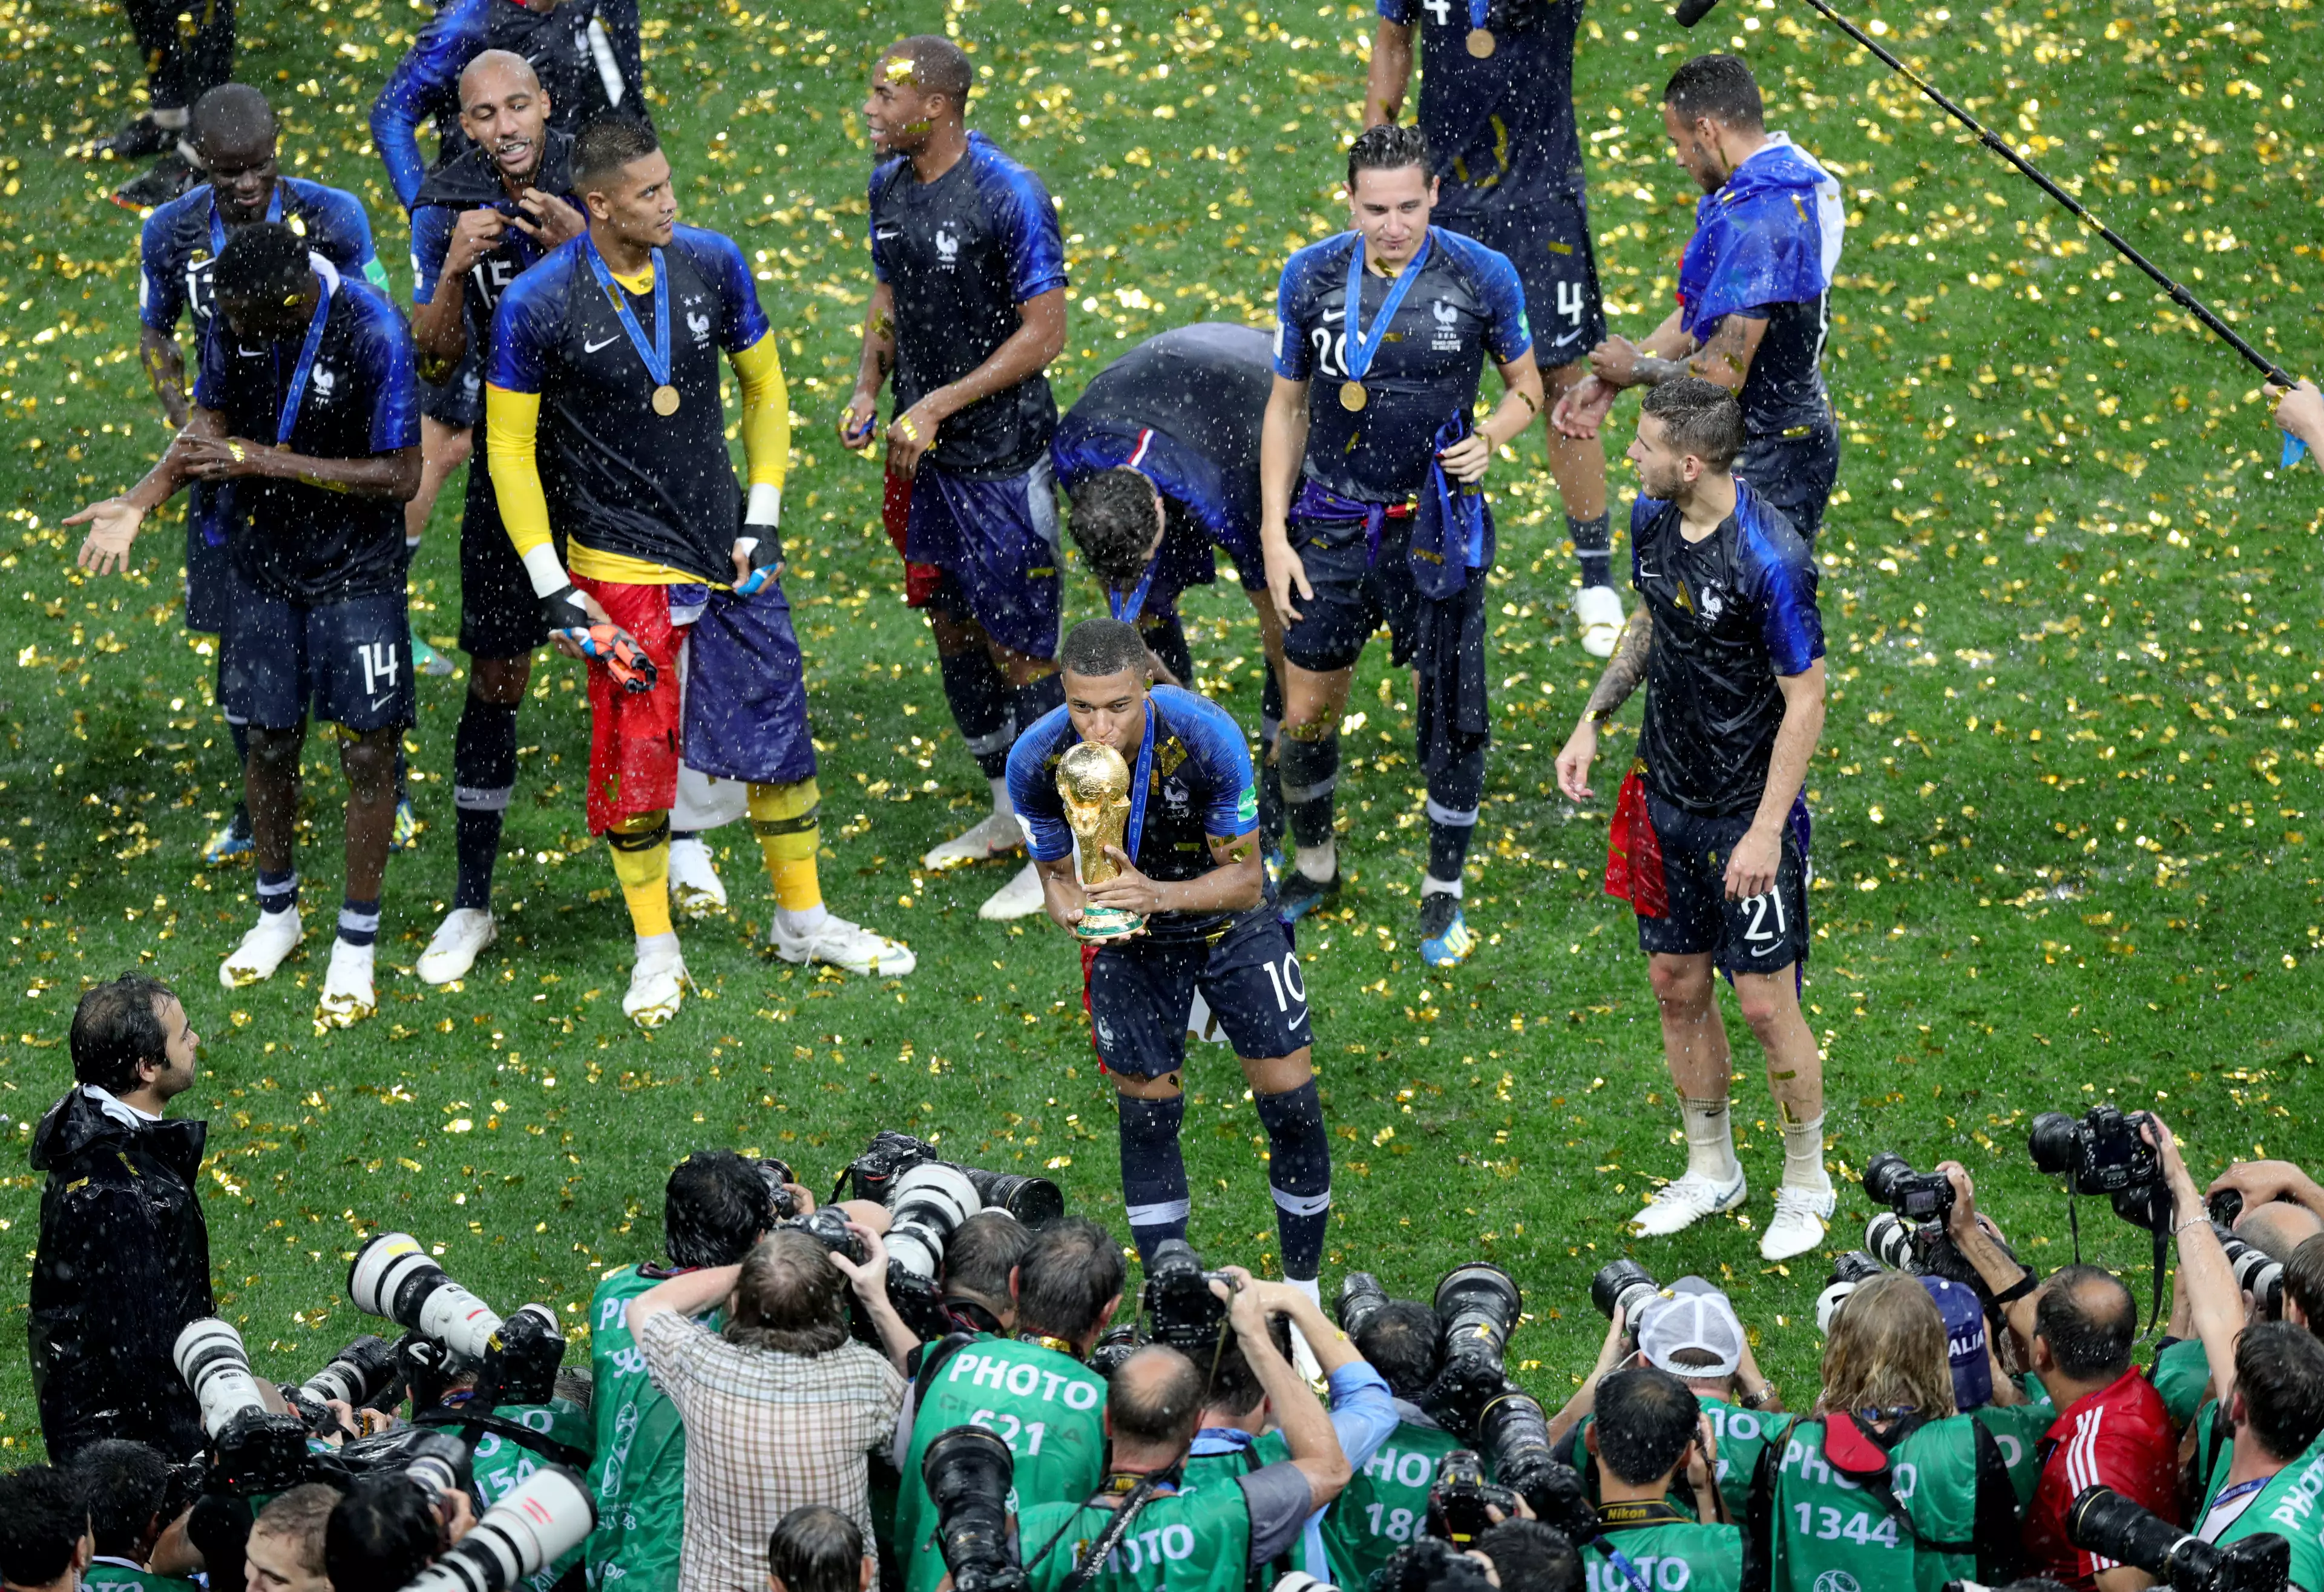 The world champions are set to add the European crown, as the France team did in 2000. Image: PA Images